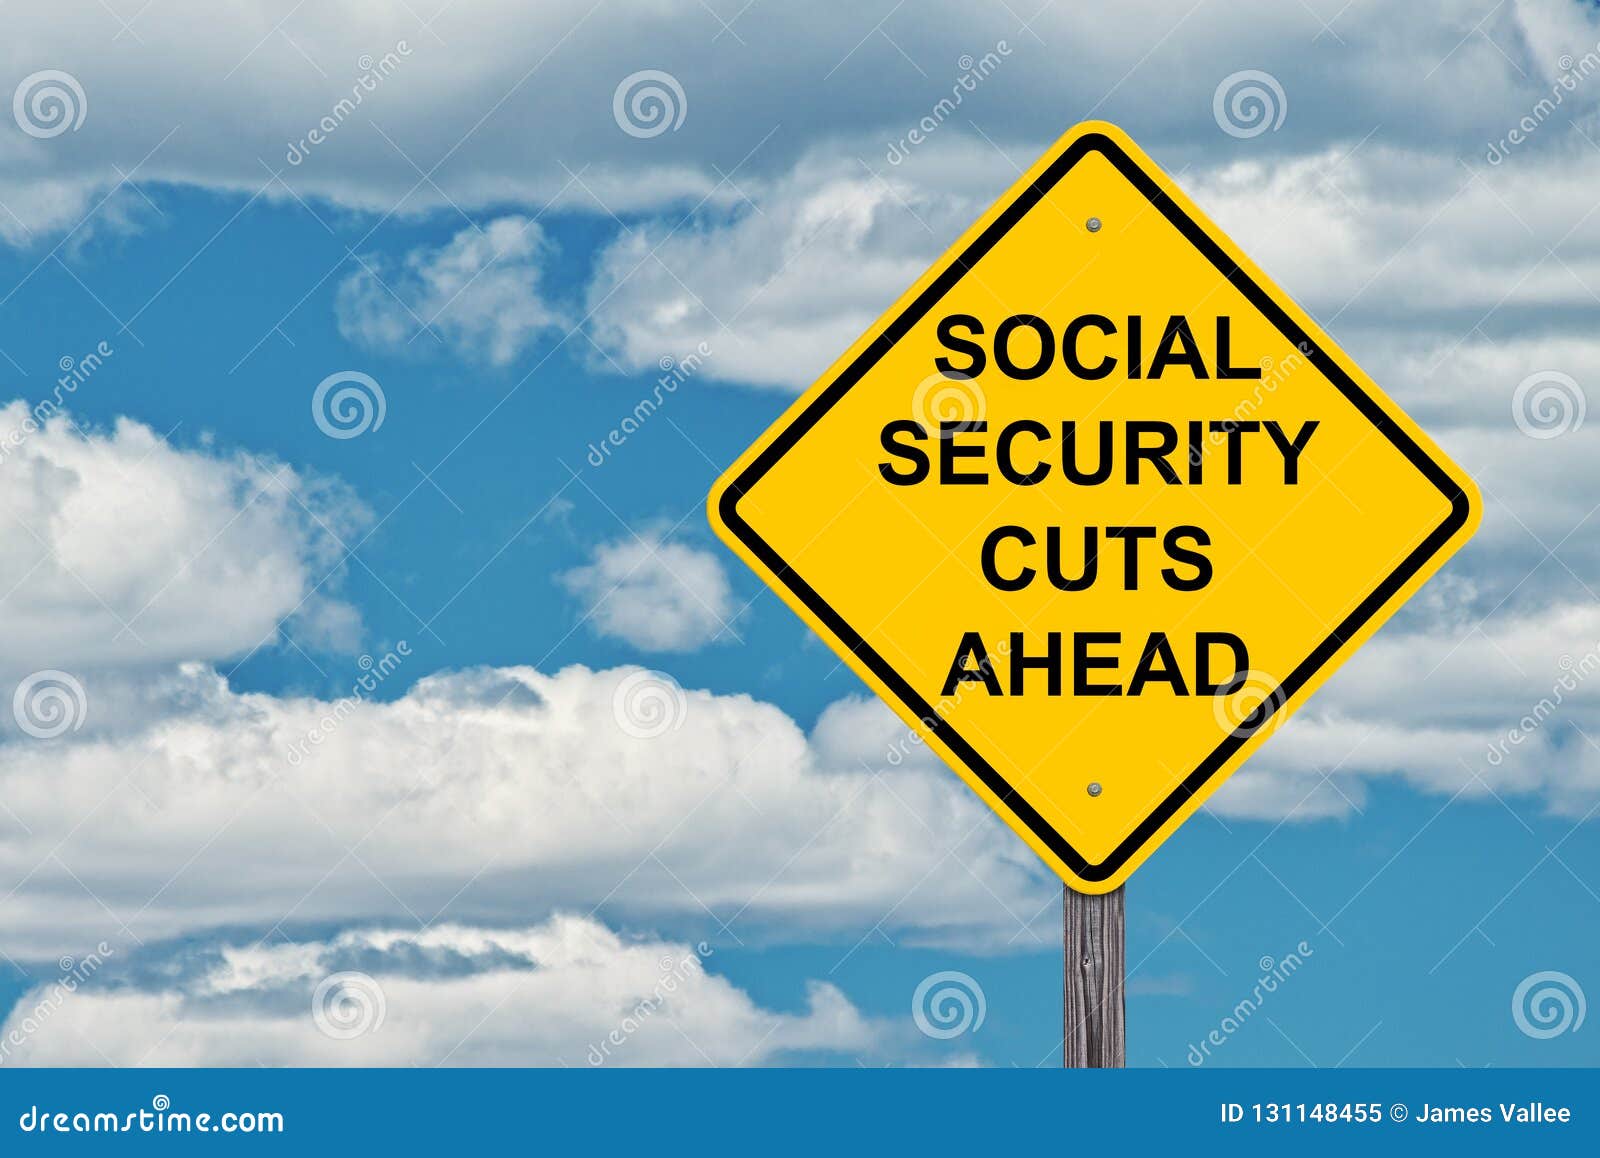 social security cuts ahead caution sign